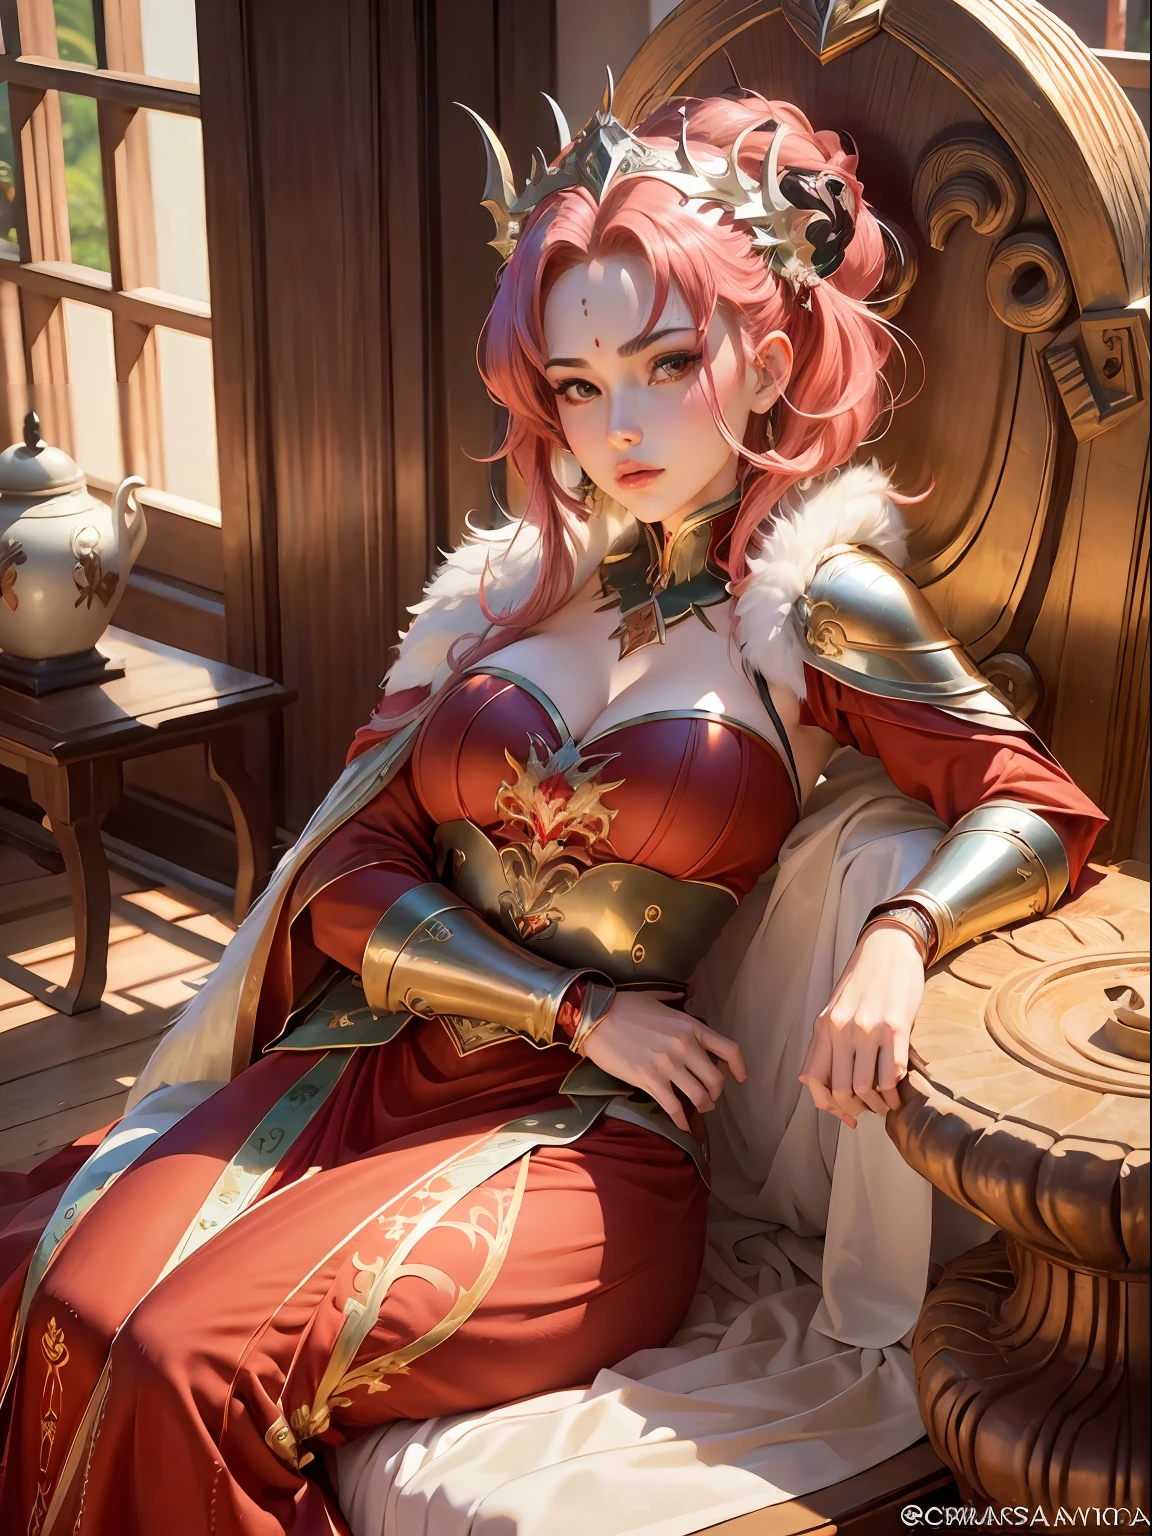 a warrior woman with sexy red hair, sitting on a fur-covered throne, face red, anime styling, seminua, pose sexy, Leg Open, lying down, (spread out